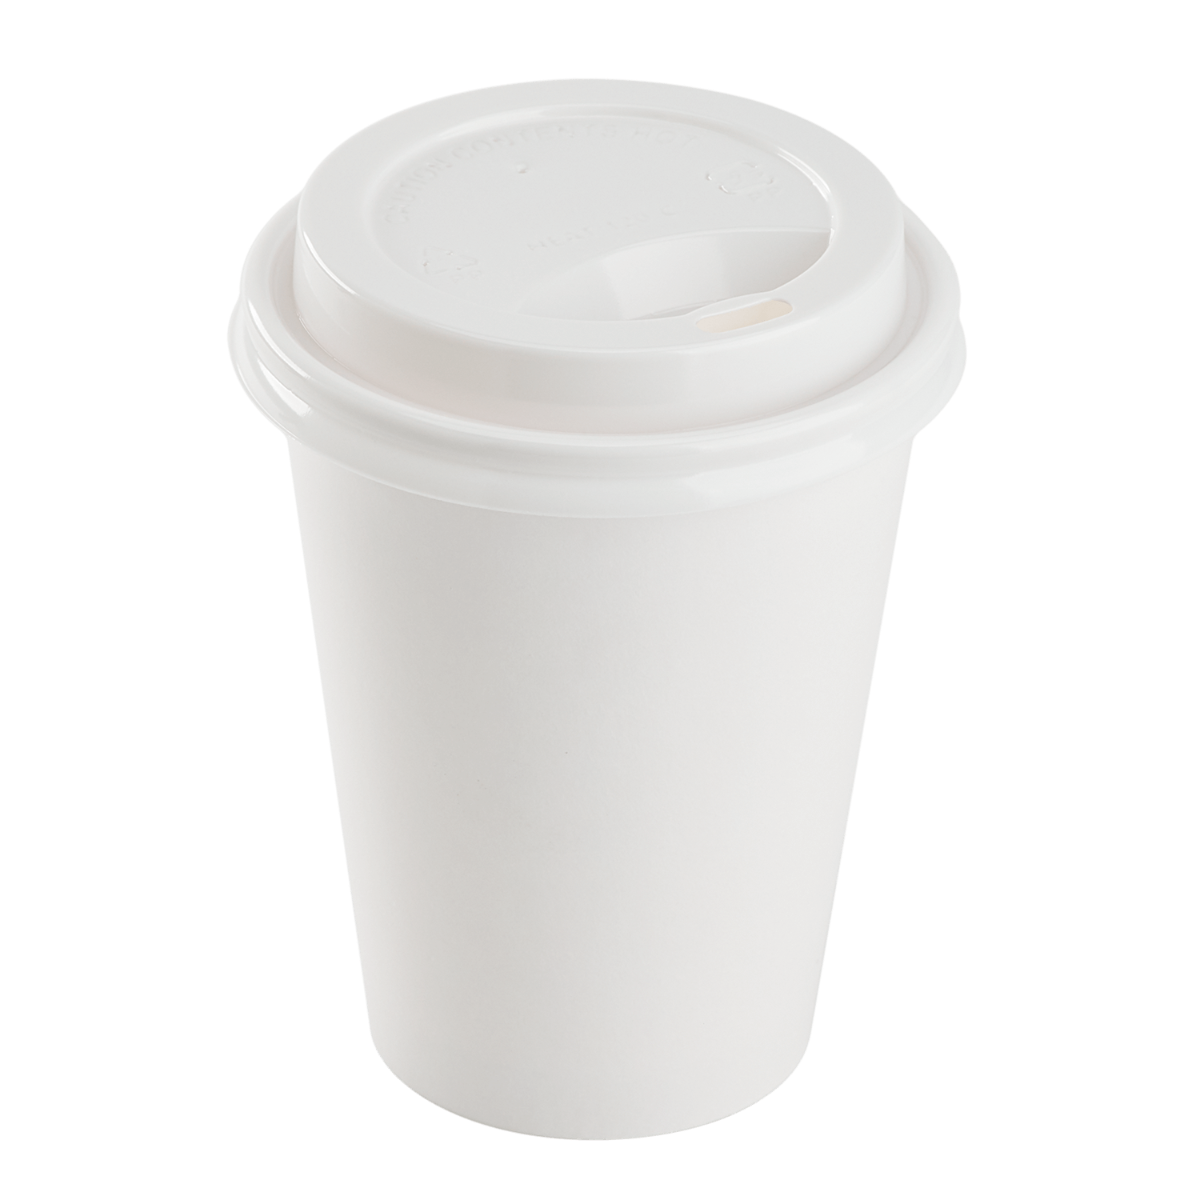 Karat PP Sipper Dome Lid for 8 oz Paper Hot Cup (White) - 1,000 ct